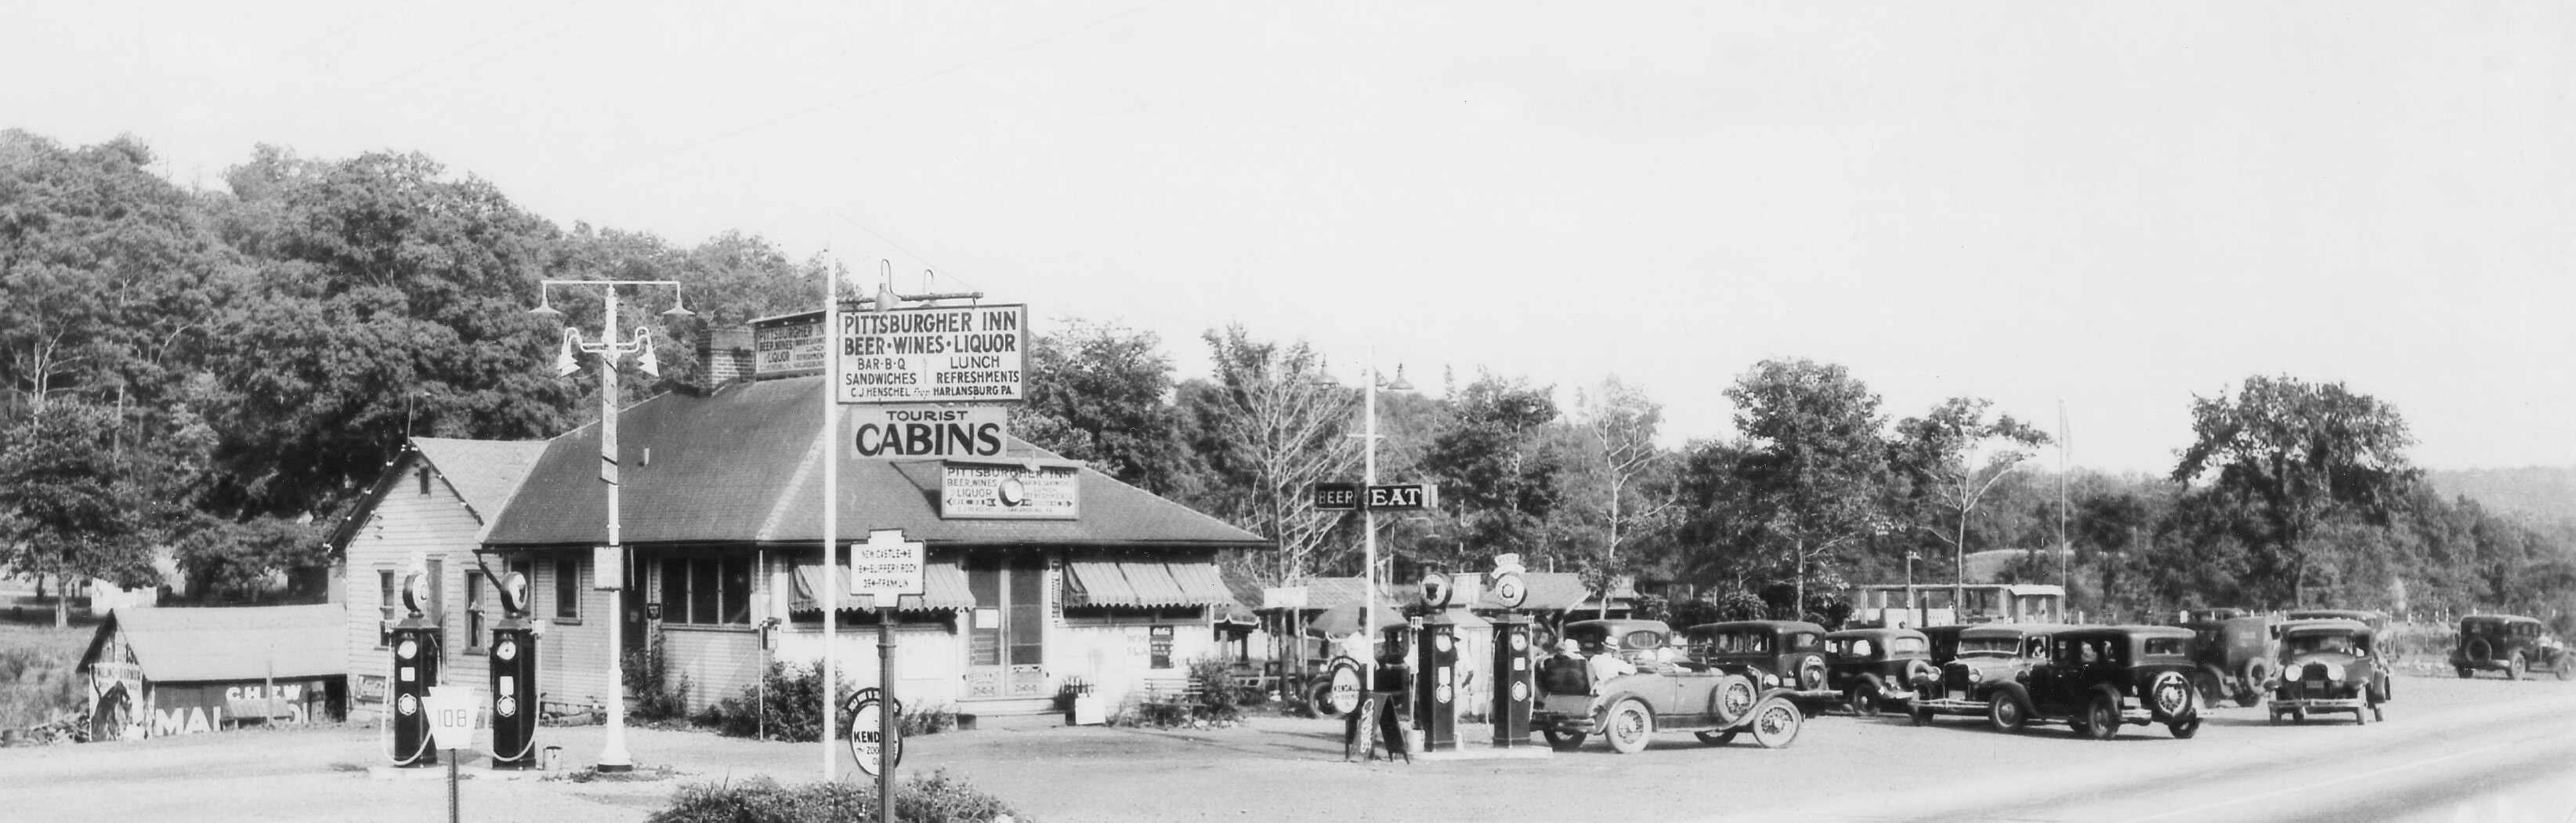 The Pittsburgher Inn was a Service Station, Restaurant and Saloon in the little town of Harlansburg Pennsylvania. Located at Route's 19 and 108 about 40 miles north of Pittsburgh. The picture looks to be late 30s or early 40s. Other amenities included a picnic area and cabins for rent. Before I-79 was built, Route 19 was the major road between Pittsburgh and Erie and was heavily traveled. View full size.